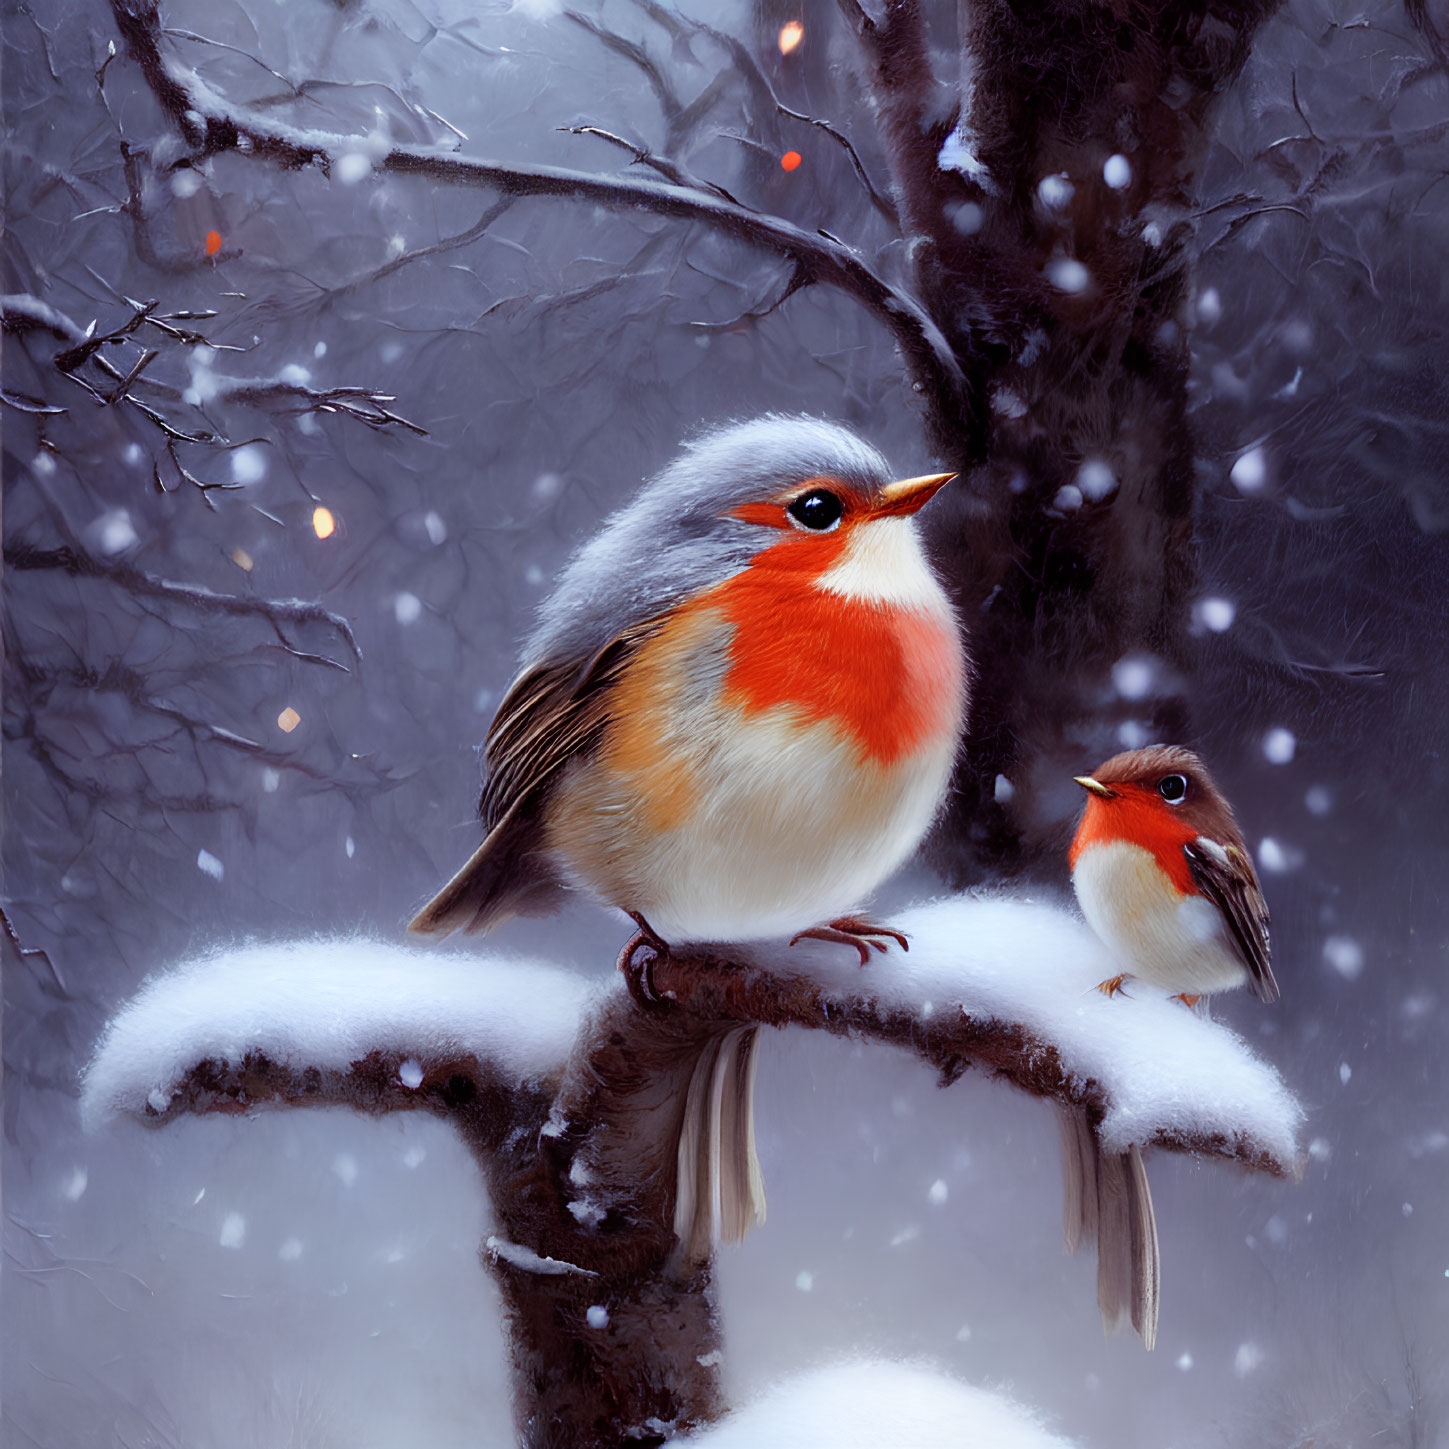 Two robins on snowy branch in serene landscape with glowing lights